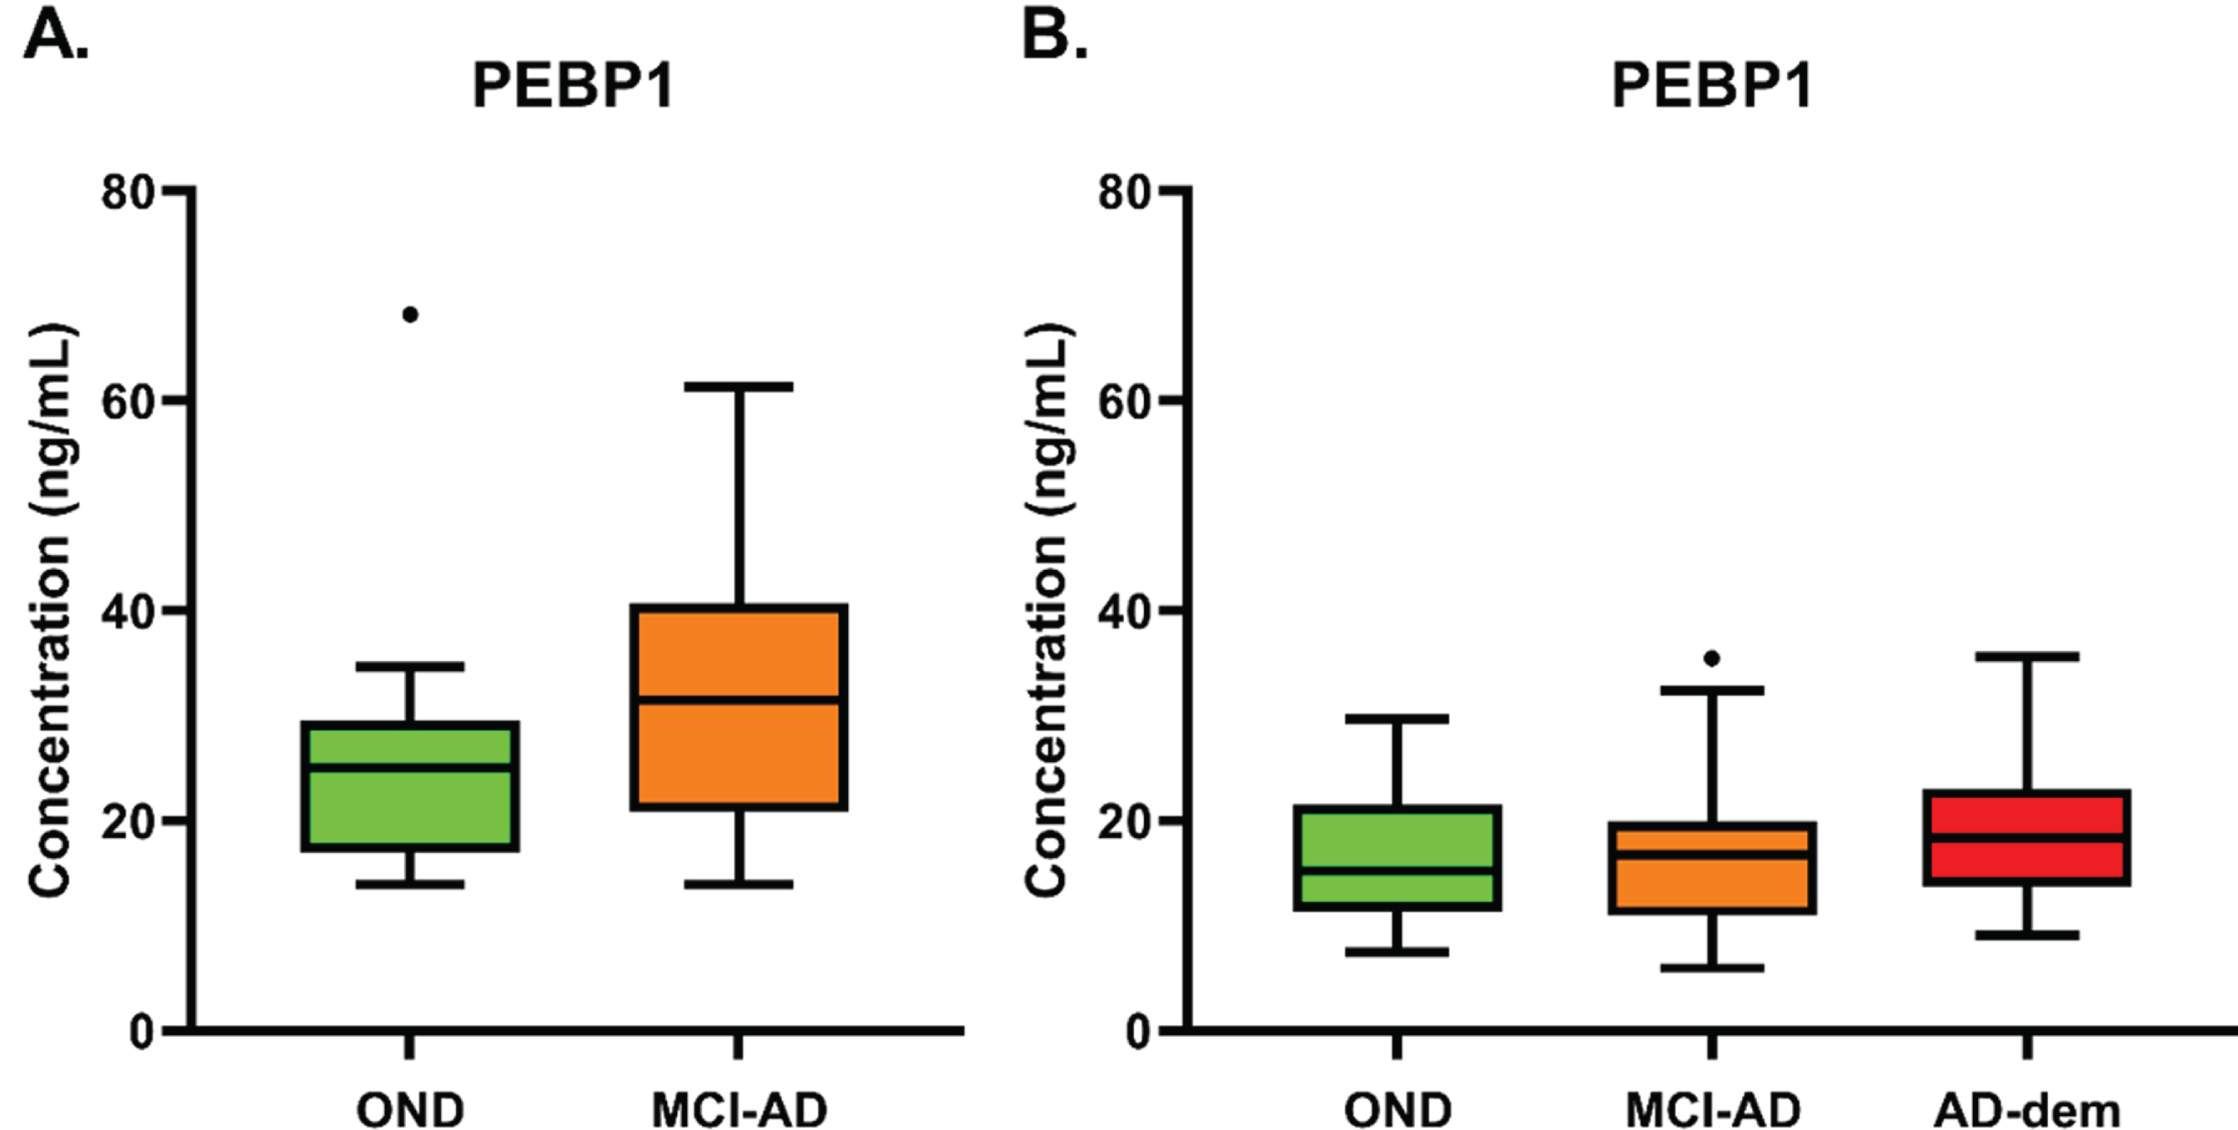 A) PEBP1 concentration (ng/mL) in CSF of OND and MCI-AD groups included in the first clinical validation (p = 0.137, assessed by Mann-Whitney test). B) PEBP1 concentration (ng/mL) in CSF of OND, MCI-AD, and AD-dem groups included in the second clinical validation (p = 0.644, assessed by Kruskal-Wallis test, followed by Dunn’s test). In boxplots, heights of boxes represent the interquartile range (from 25th to 75th percentile). The line in the middle of the box represents the median. Whiskers and outliers are plotted according to the Tukey’s method.